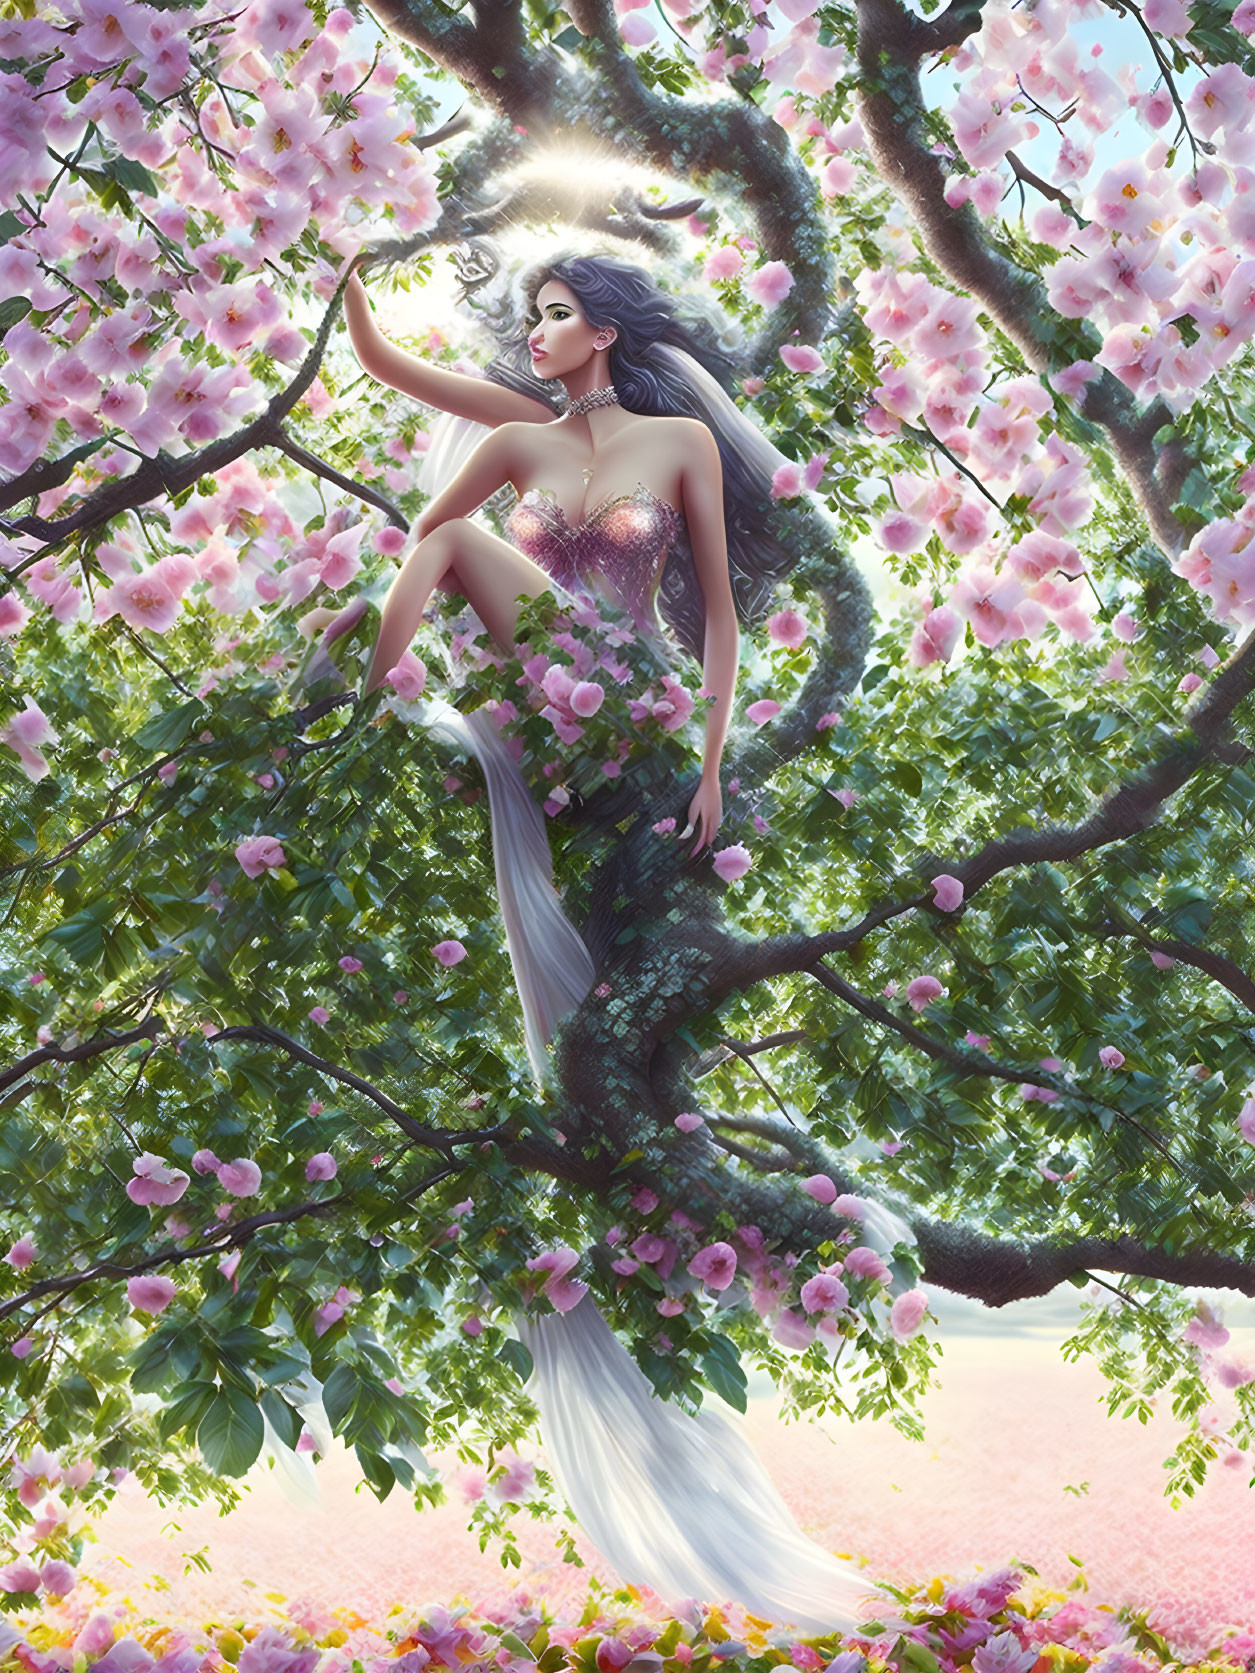 Mystical woman with long hair in blossoming tree with pink flowers